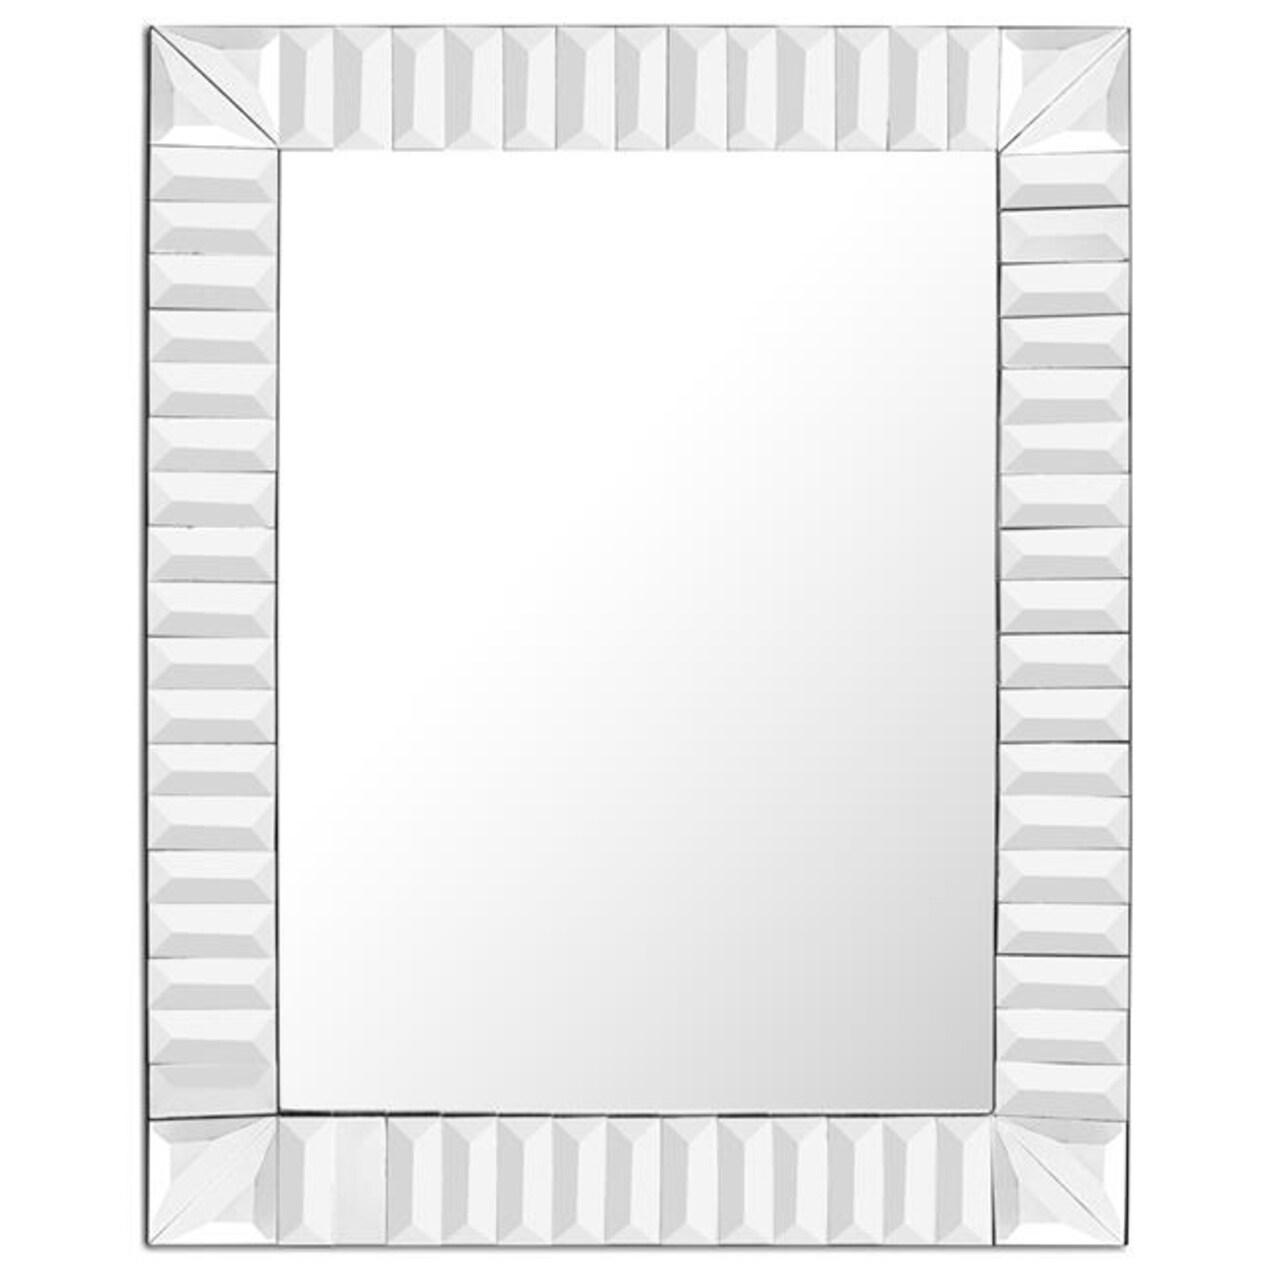 Camden Isle 86330 29.5 x 37.4 in. Waves Accent Mirror, Clear